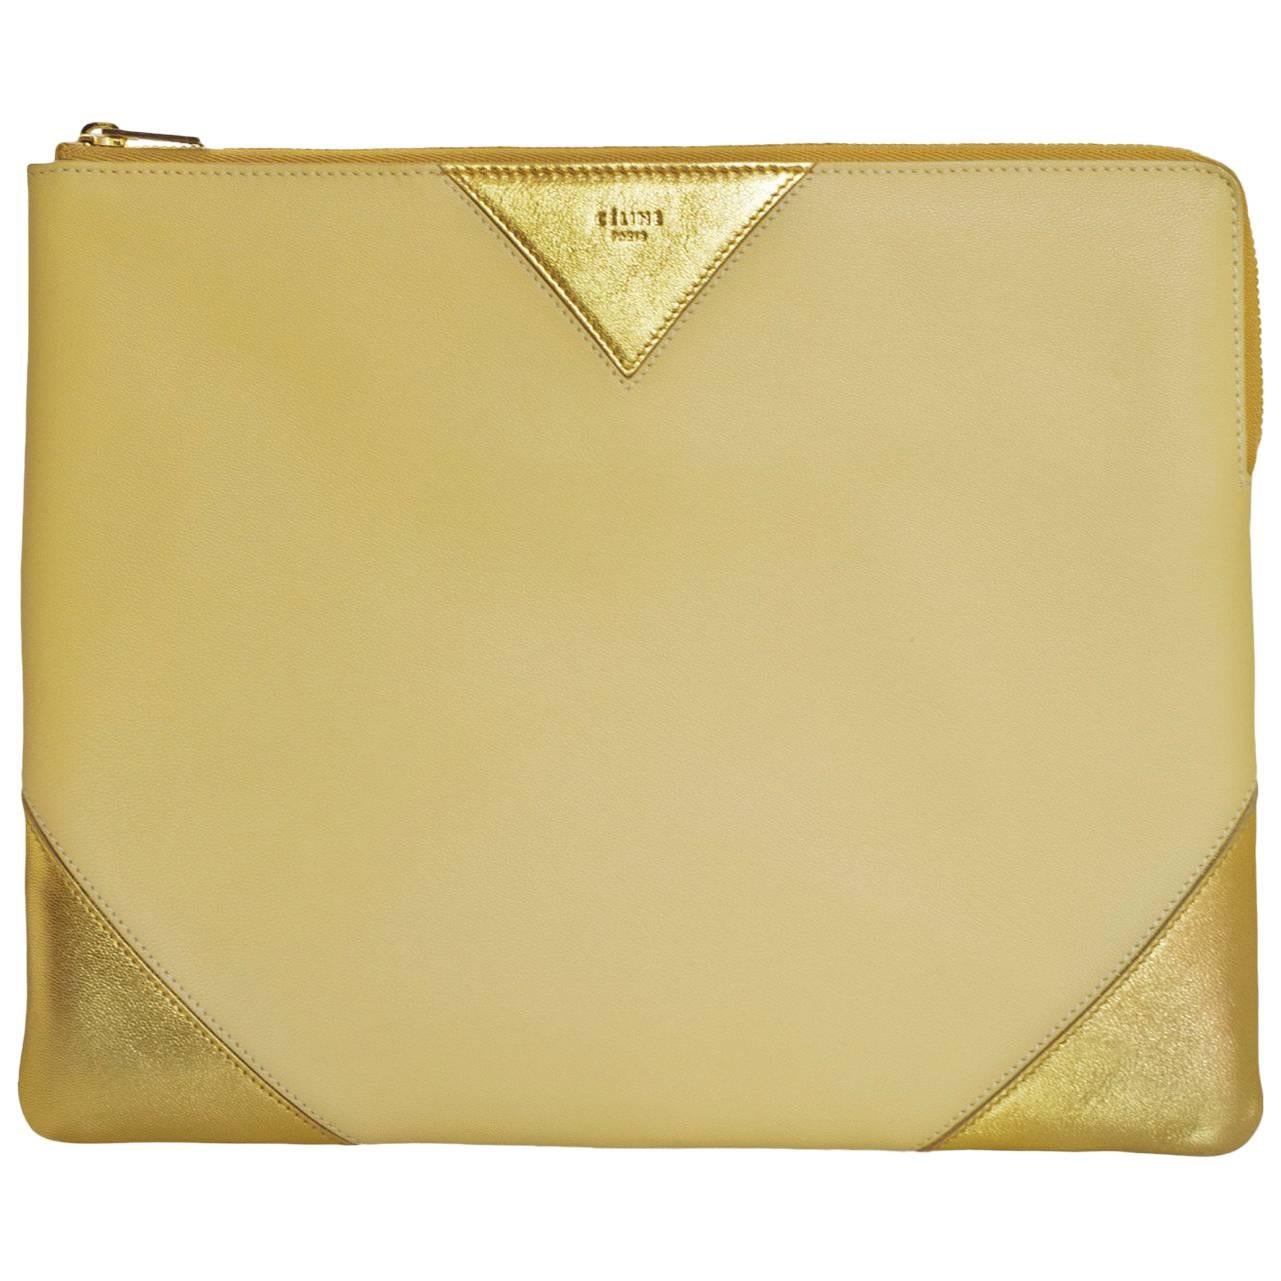 Celine Bi-Colored iPad Zip Pouch Bag with Dust Bag & Tags